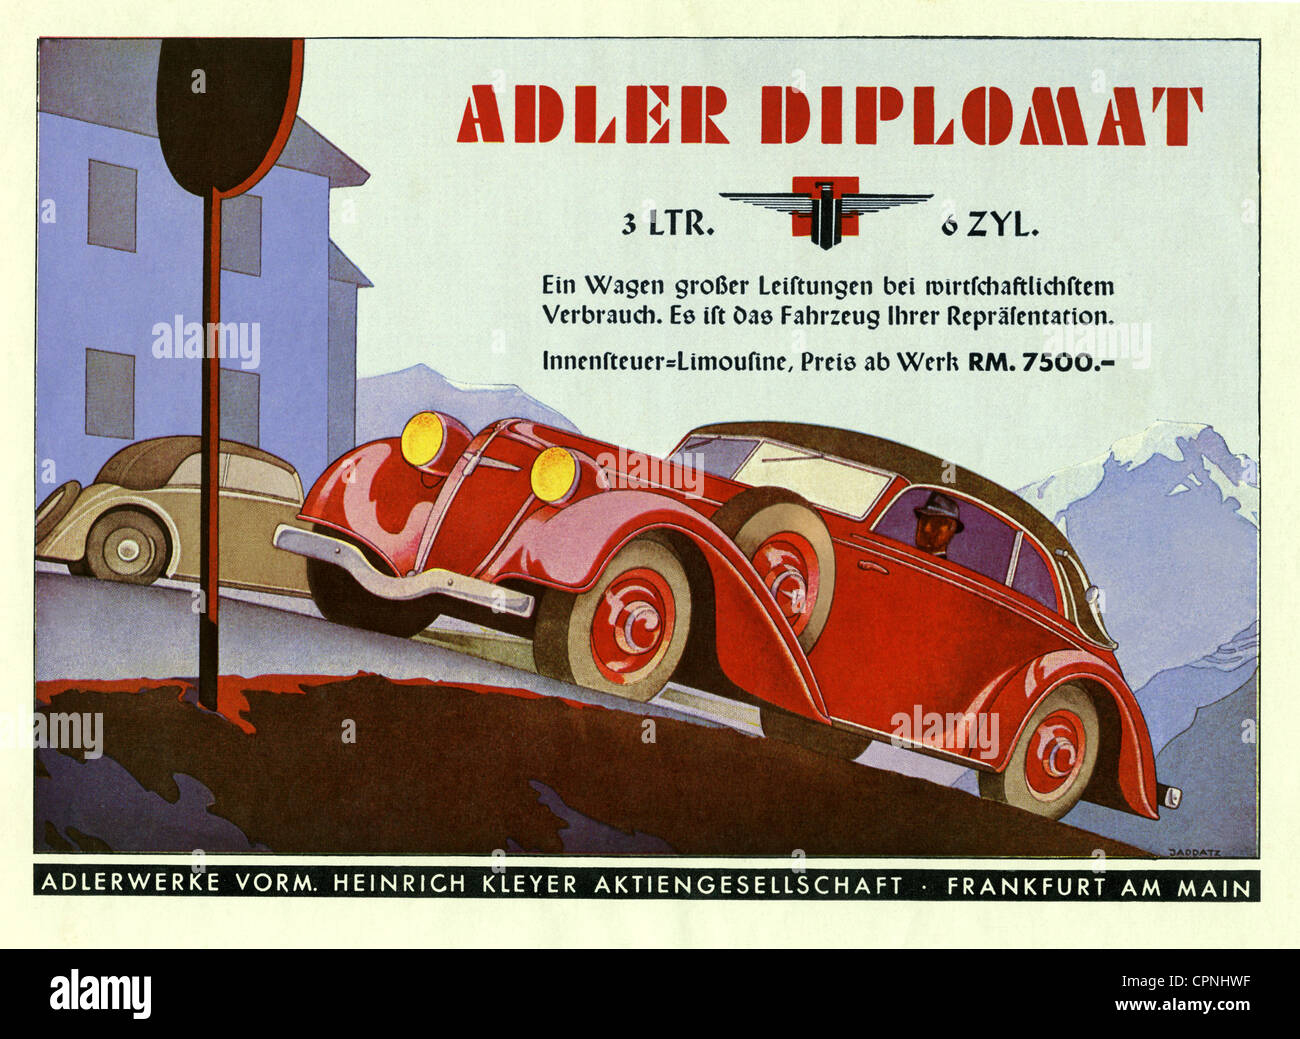 advertising,transport / transportation,cars,Adler Diplomat,3 litre,2916 cubic centimetre cylinder capacity,6 cylinder,60 horsepower,maximum speed 100 km per hours,limousine,original price: 7500 reichsmark,Adler factories was found by Heinrich Kleyer as bicycle factory in 1880,magazine advertising,Germany,1934,luxurious car,luxury car,luxurious cars,luxury cars,car advertising,car maker,aumaker,car makers,aumakers,motor car,auto,automobile,passenger car,motorcar,motorcars,autos,automobiles,passenger cars,German,Germans,Made in ,Additional-Rights-Clearences-Not Available Stock Photo